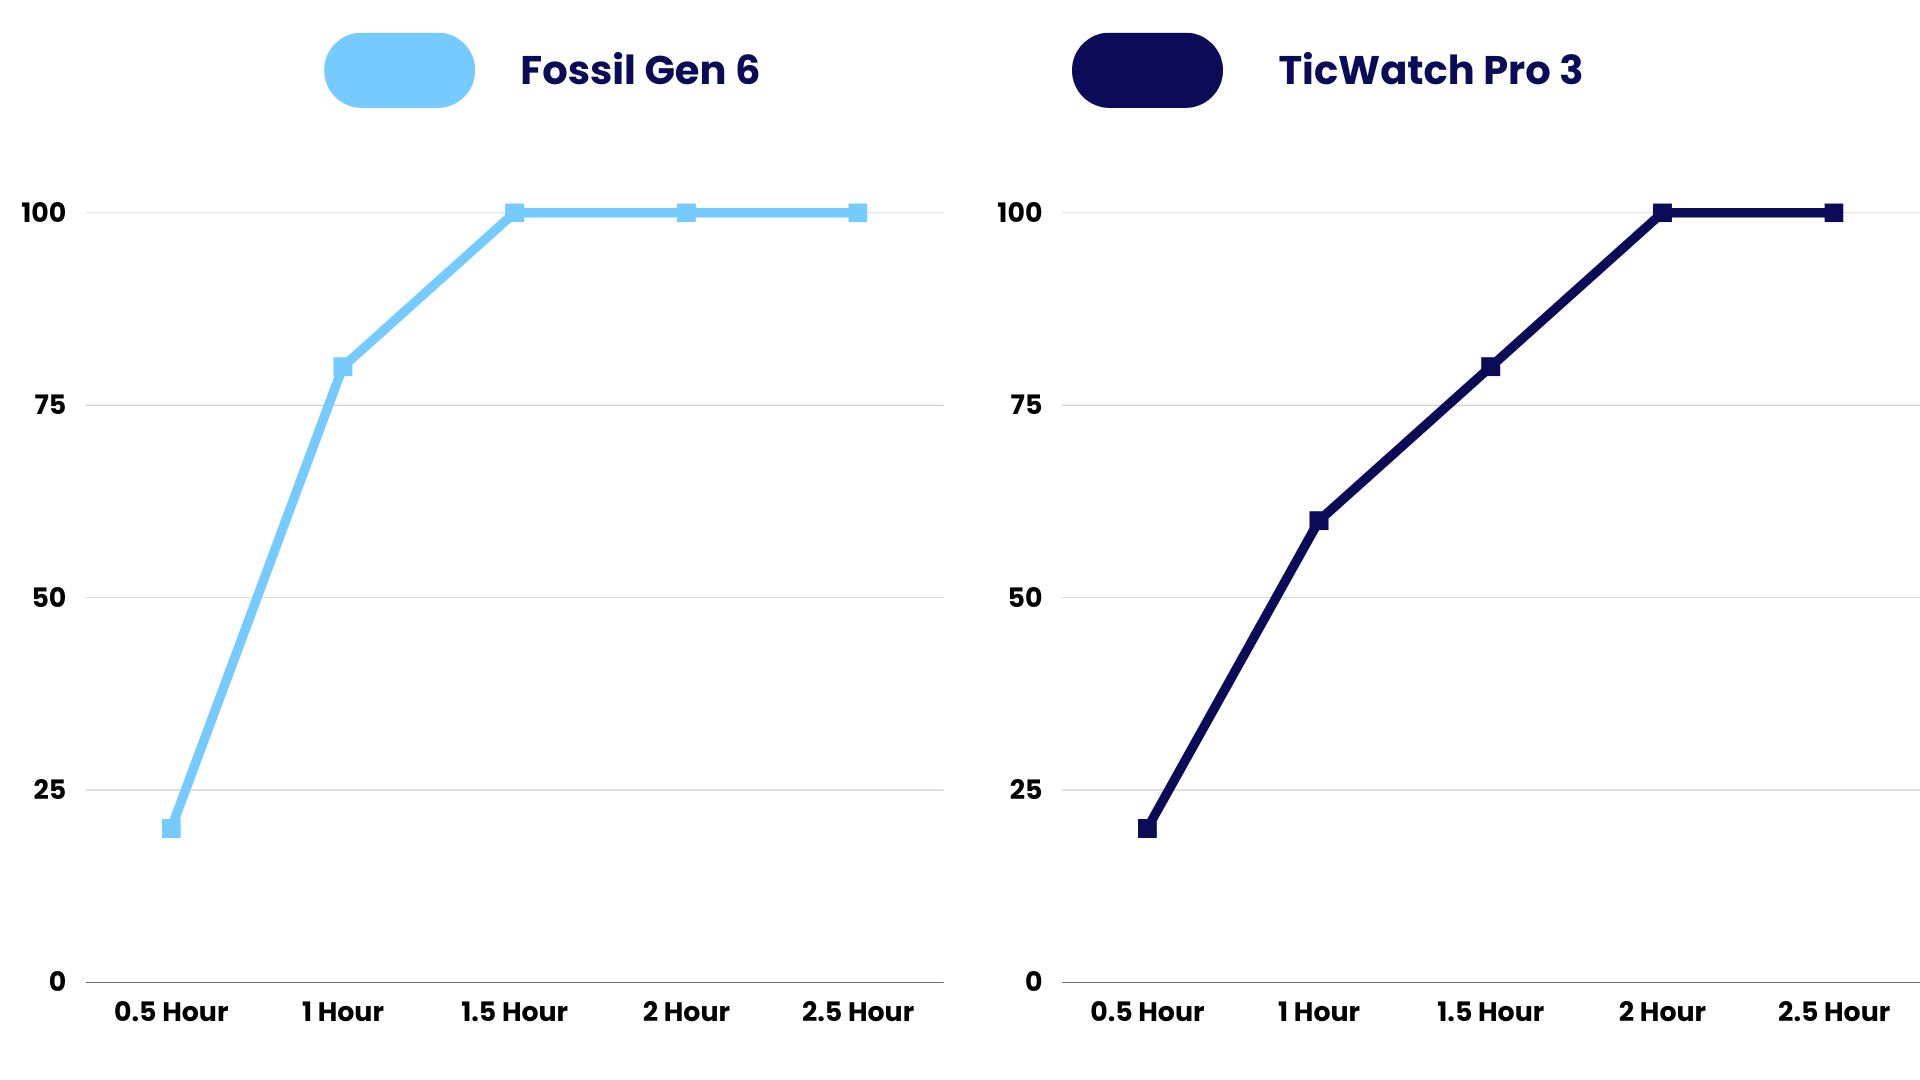 Charging Time Comparison of Fossil Gen 6 vs TicWatch Pro 3